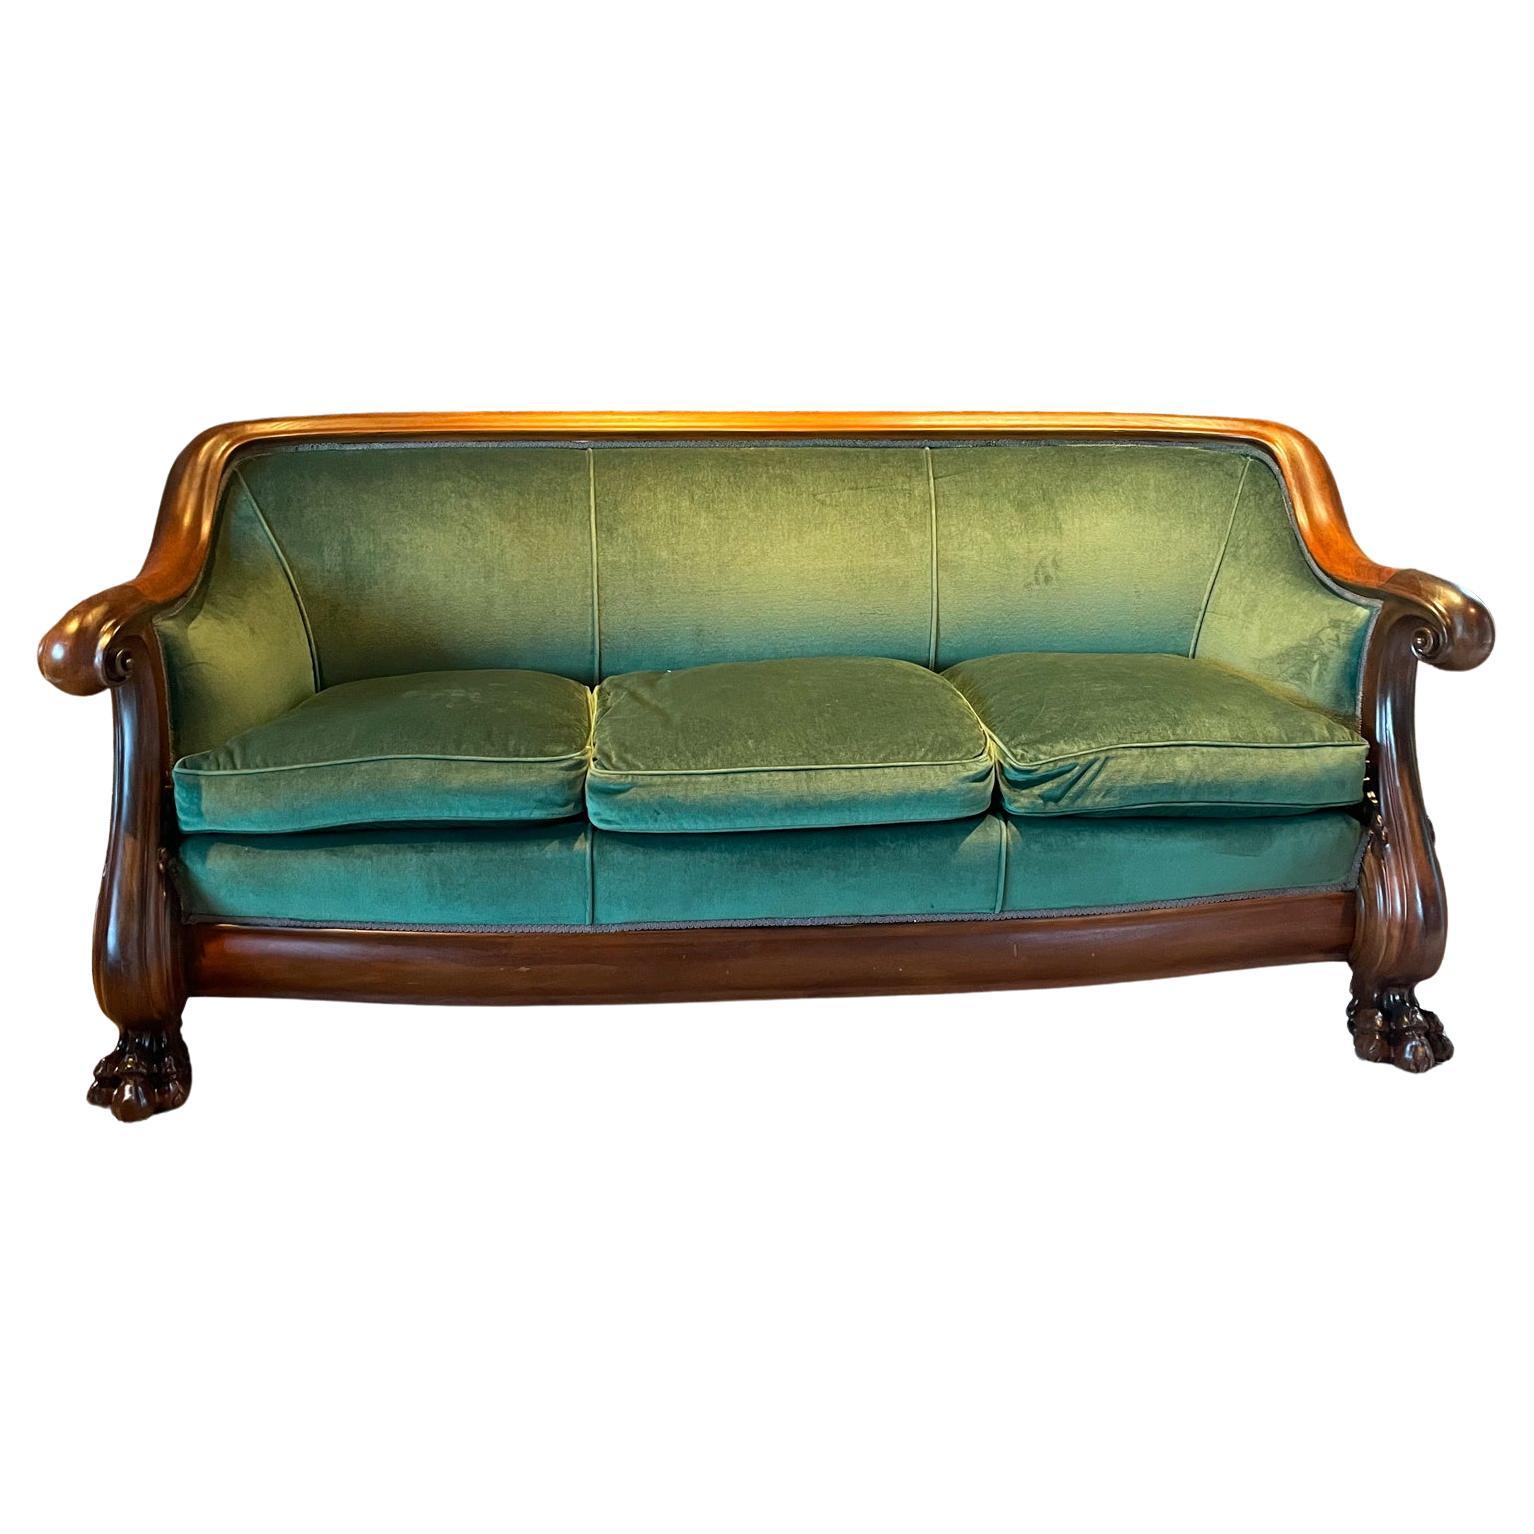 Victoria empire settee three-seater sofa hand carved mahogany green velvet
Comfortable elegance, quality and craftsmanship outstanding
made in the USA 1920s
37.5 h x 85.5 w x 32.5 d seat 22 arm 30.5 h
Solid mahogany wood with lion paw feet. 
Legs